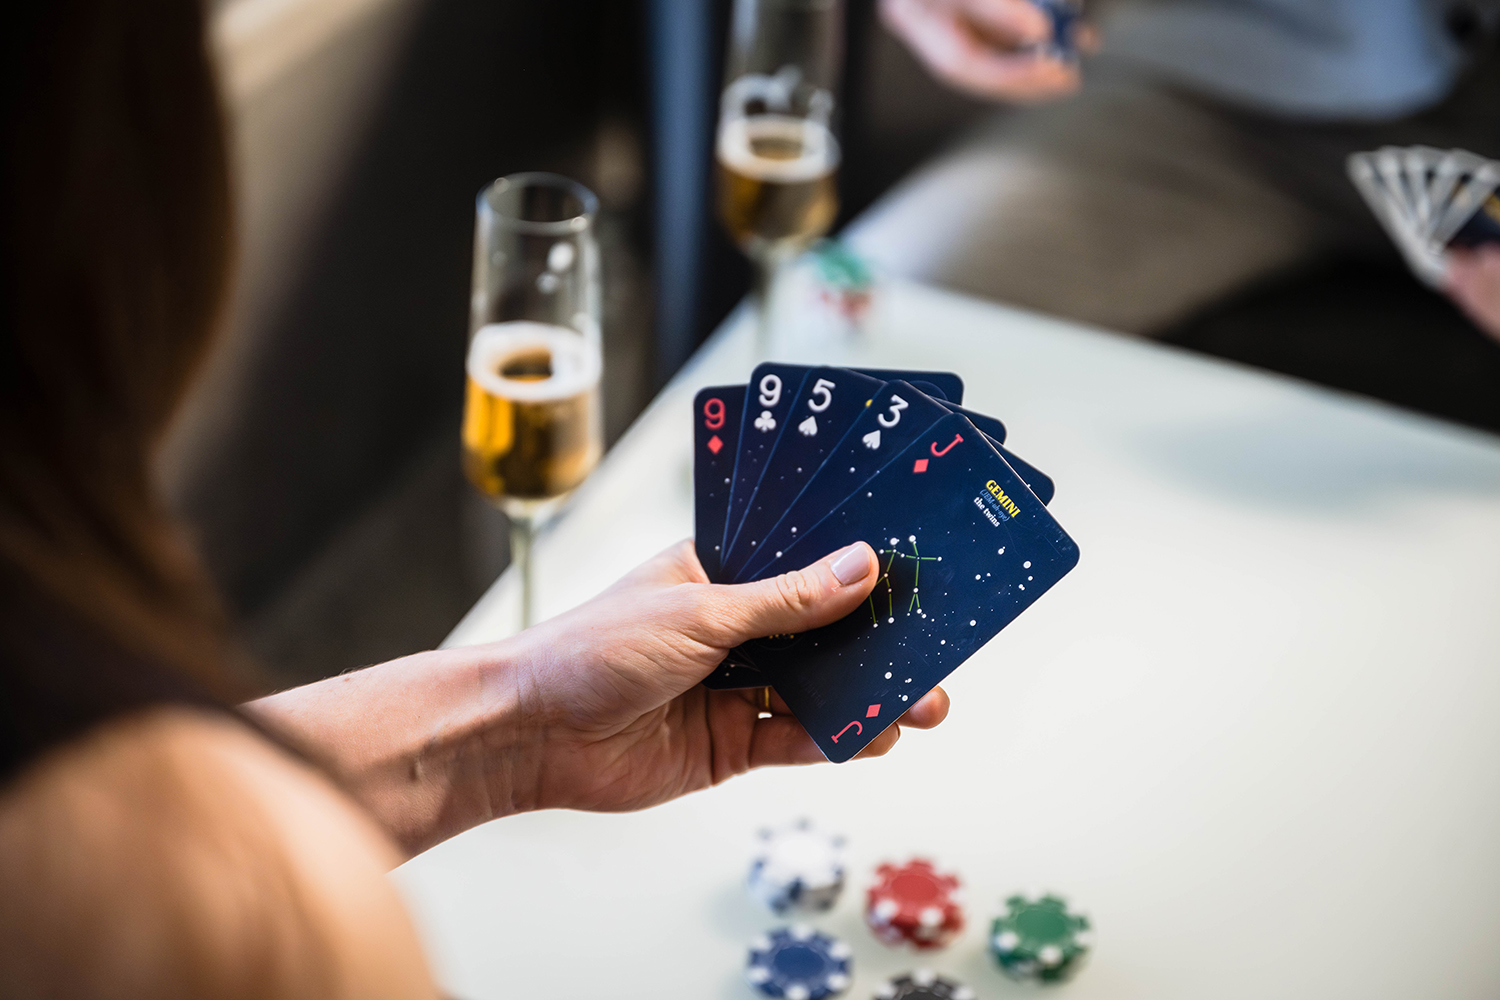 A marrier holds five cards during a game of five card stud.